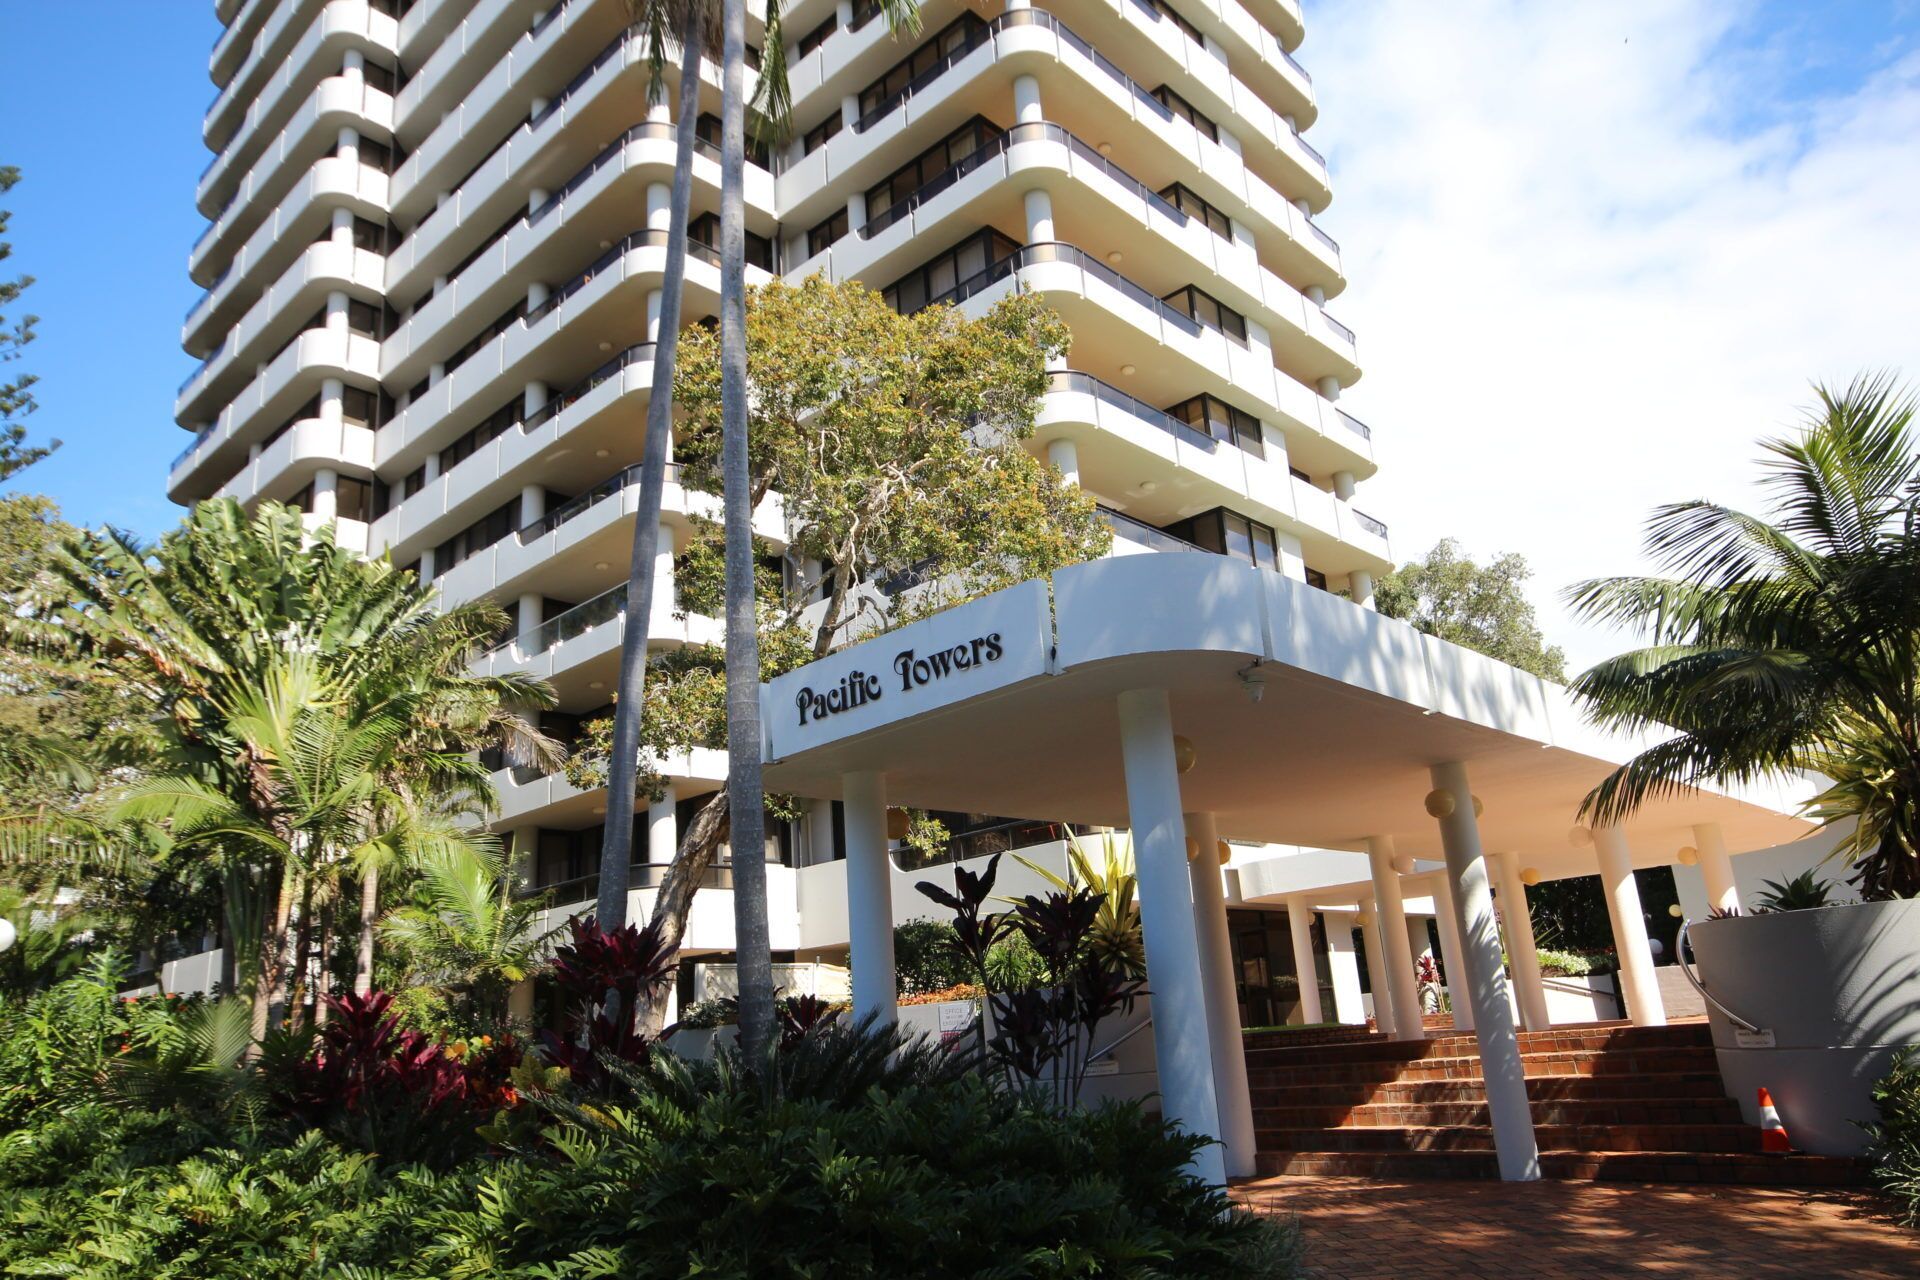 Pacific Towers 402 - Coffs Harbour, NSW